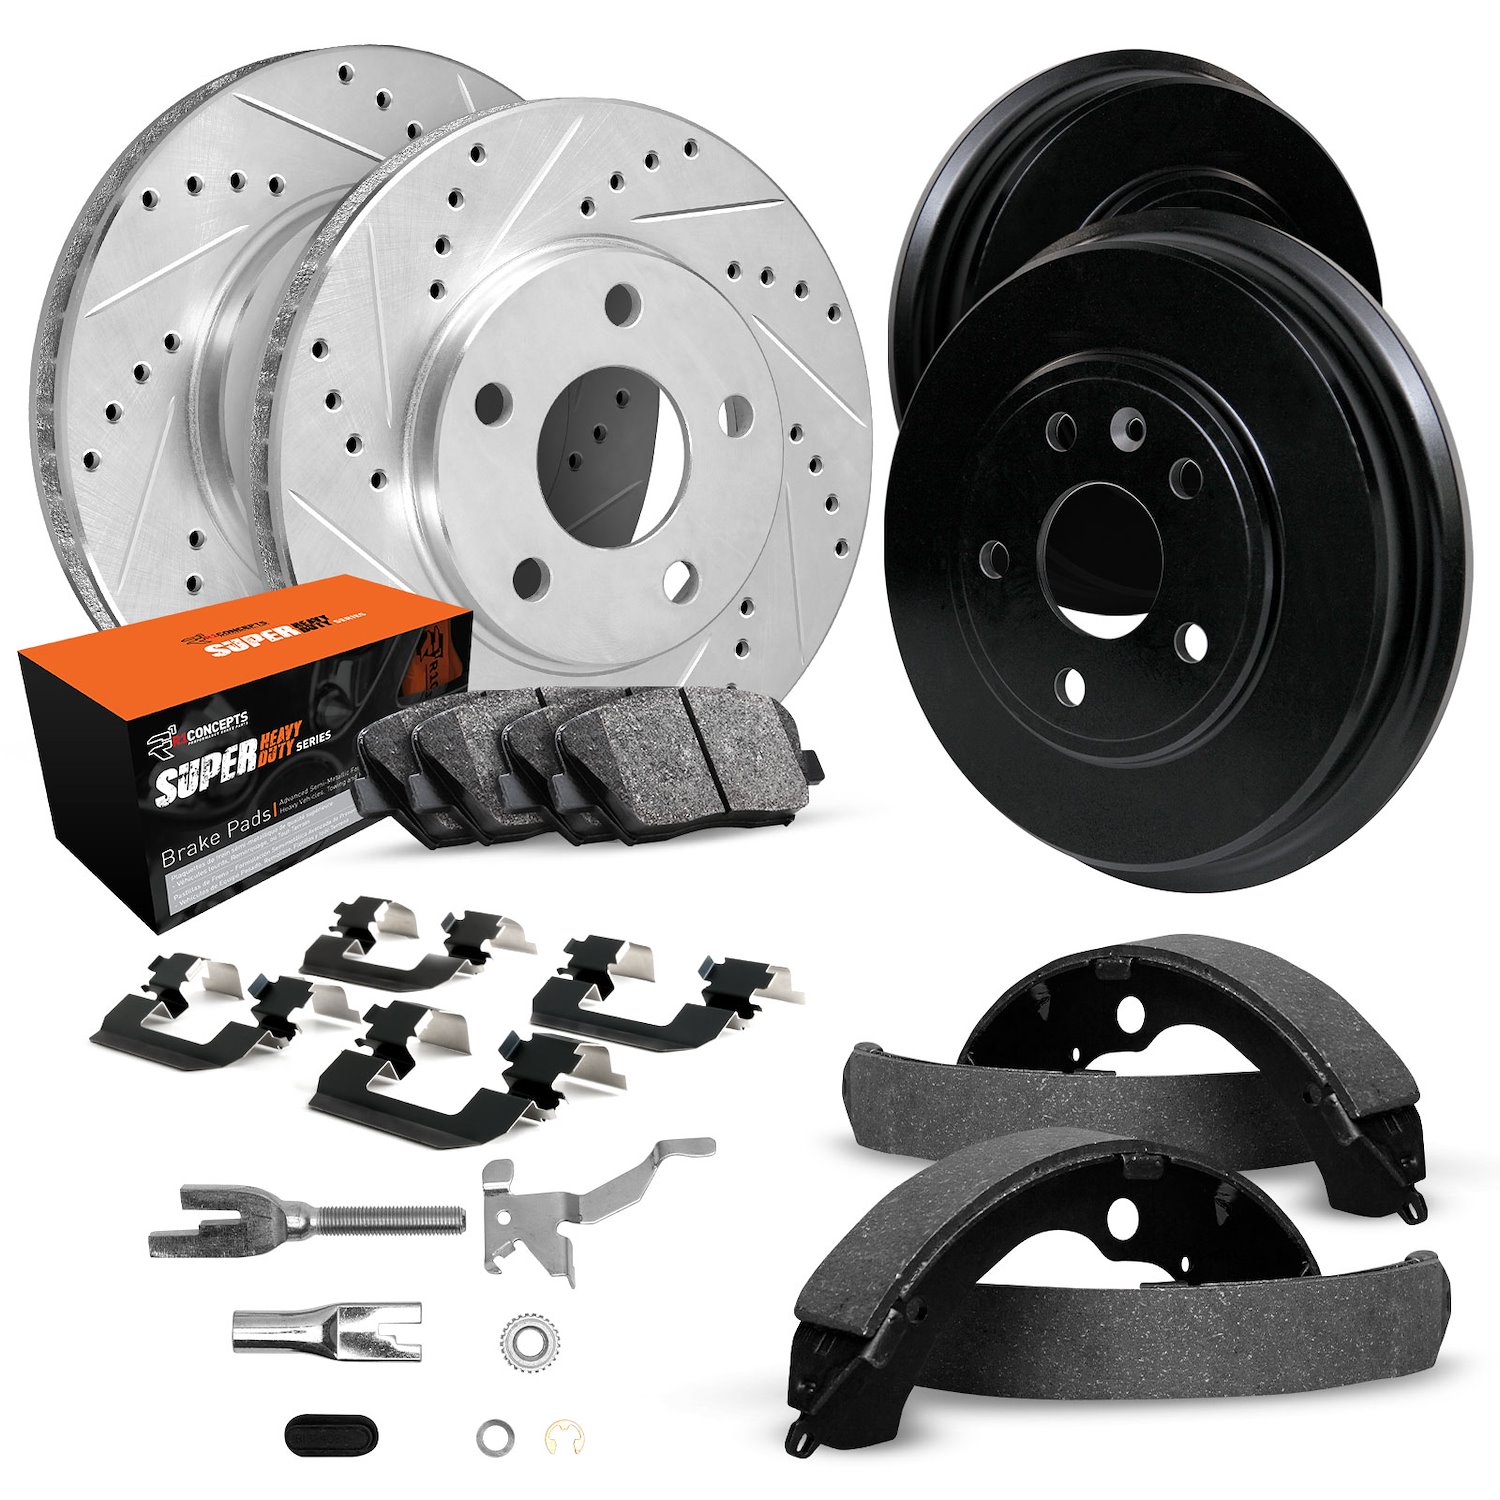 E-Line Drilled/Slotted Silver Rotor & Drum Set w/Super-Duty Pads, Shoes/Hardware/Adjusters, 1974-1976 Mopar